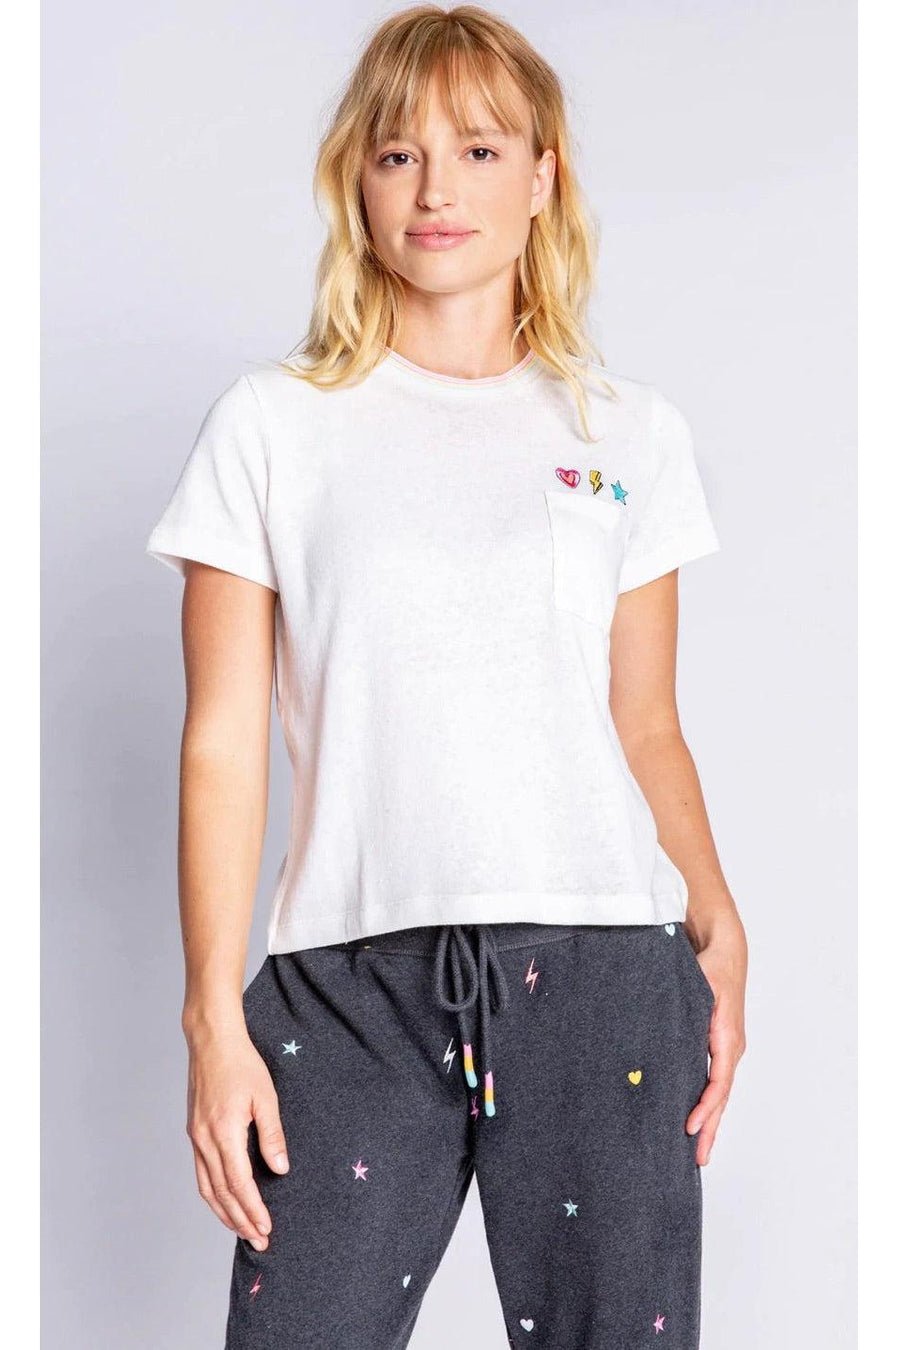 Shop PJ Salvage One Love Embroidered T-Shirt - Premium T-Shirt from PJ Salvage Online now at Spoiled Brat 